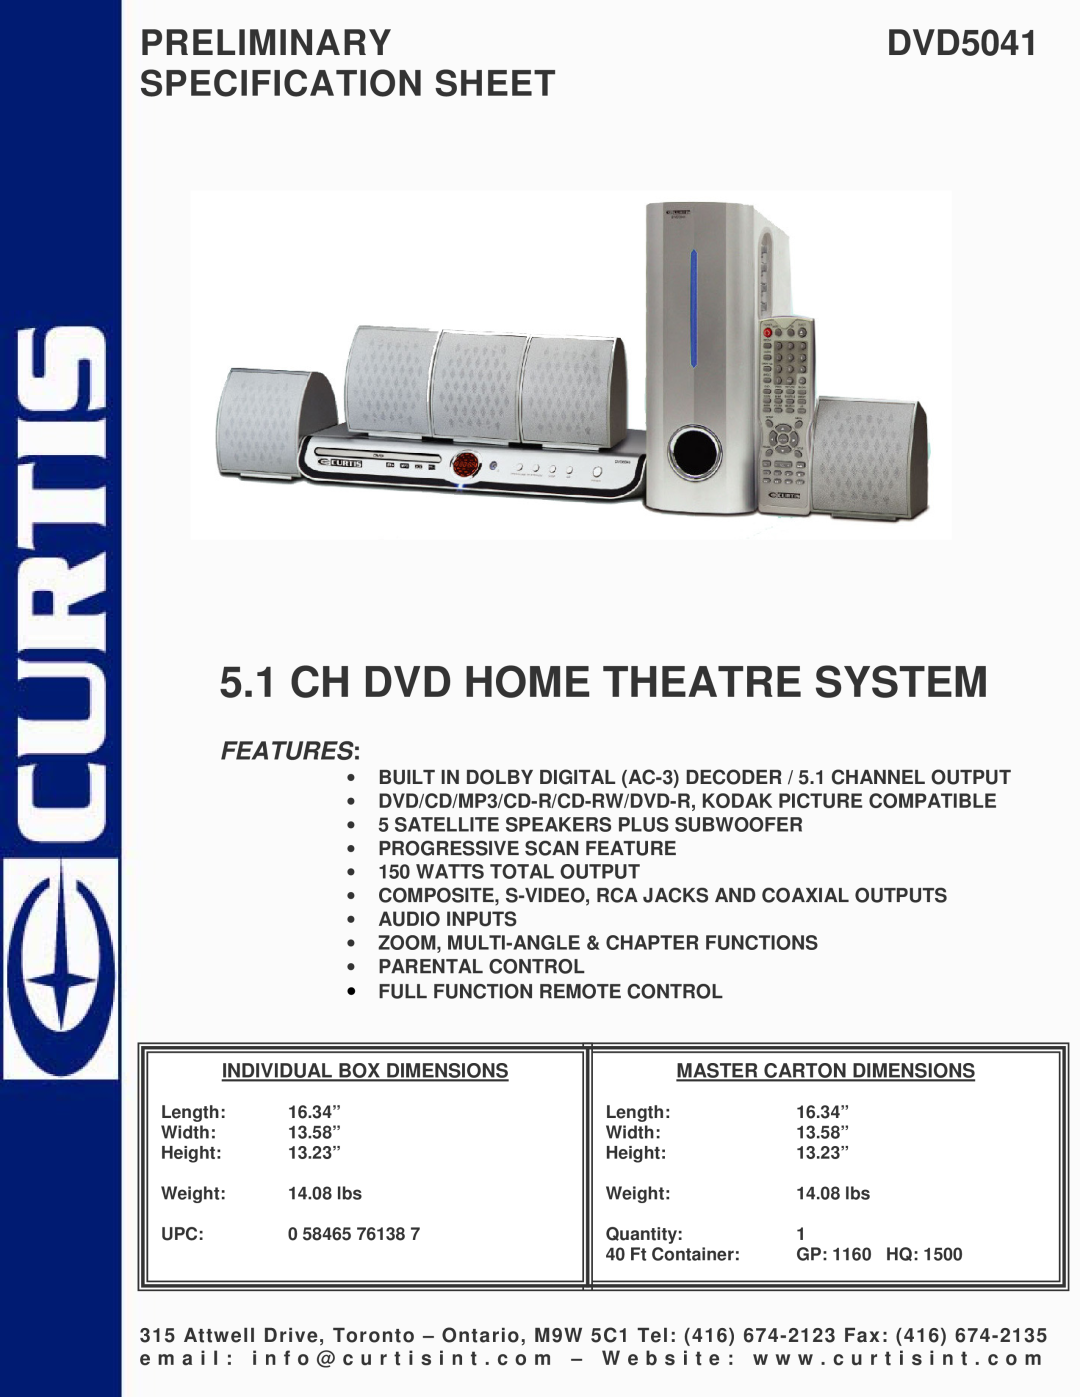 Curtis dvd5041 specifications Ch Dvd Home Theatre System, PRELIMINARYDVD5041 SPECIFICATION SHEET, Features 